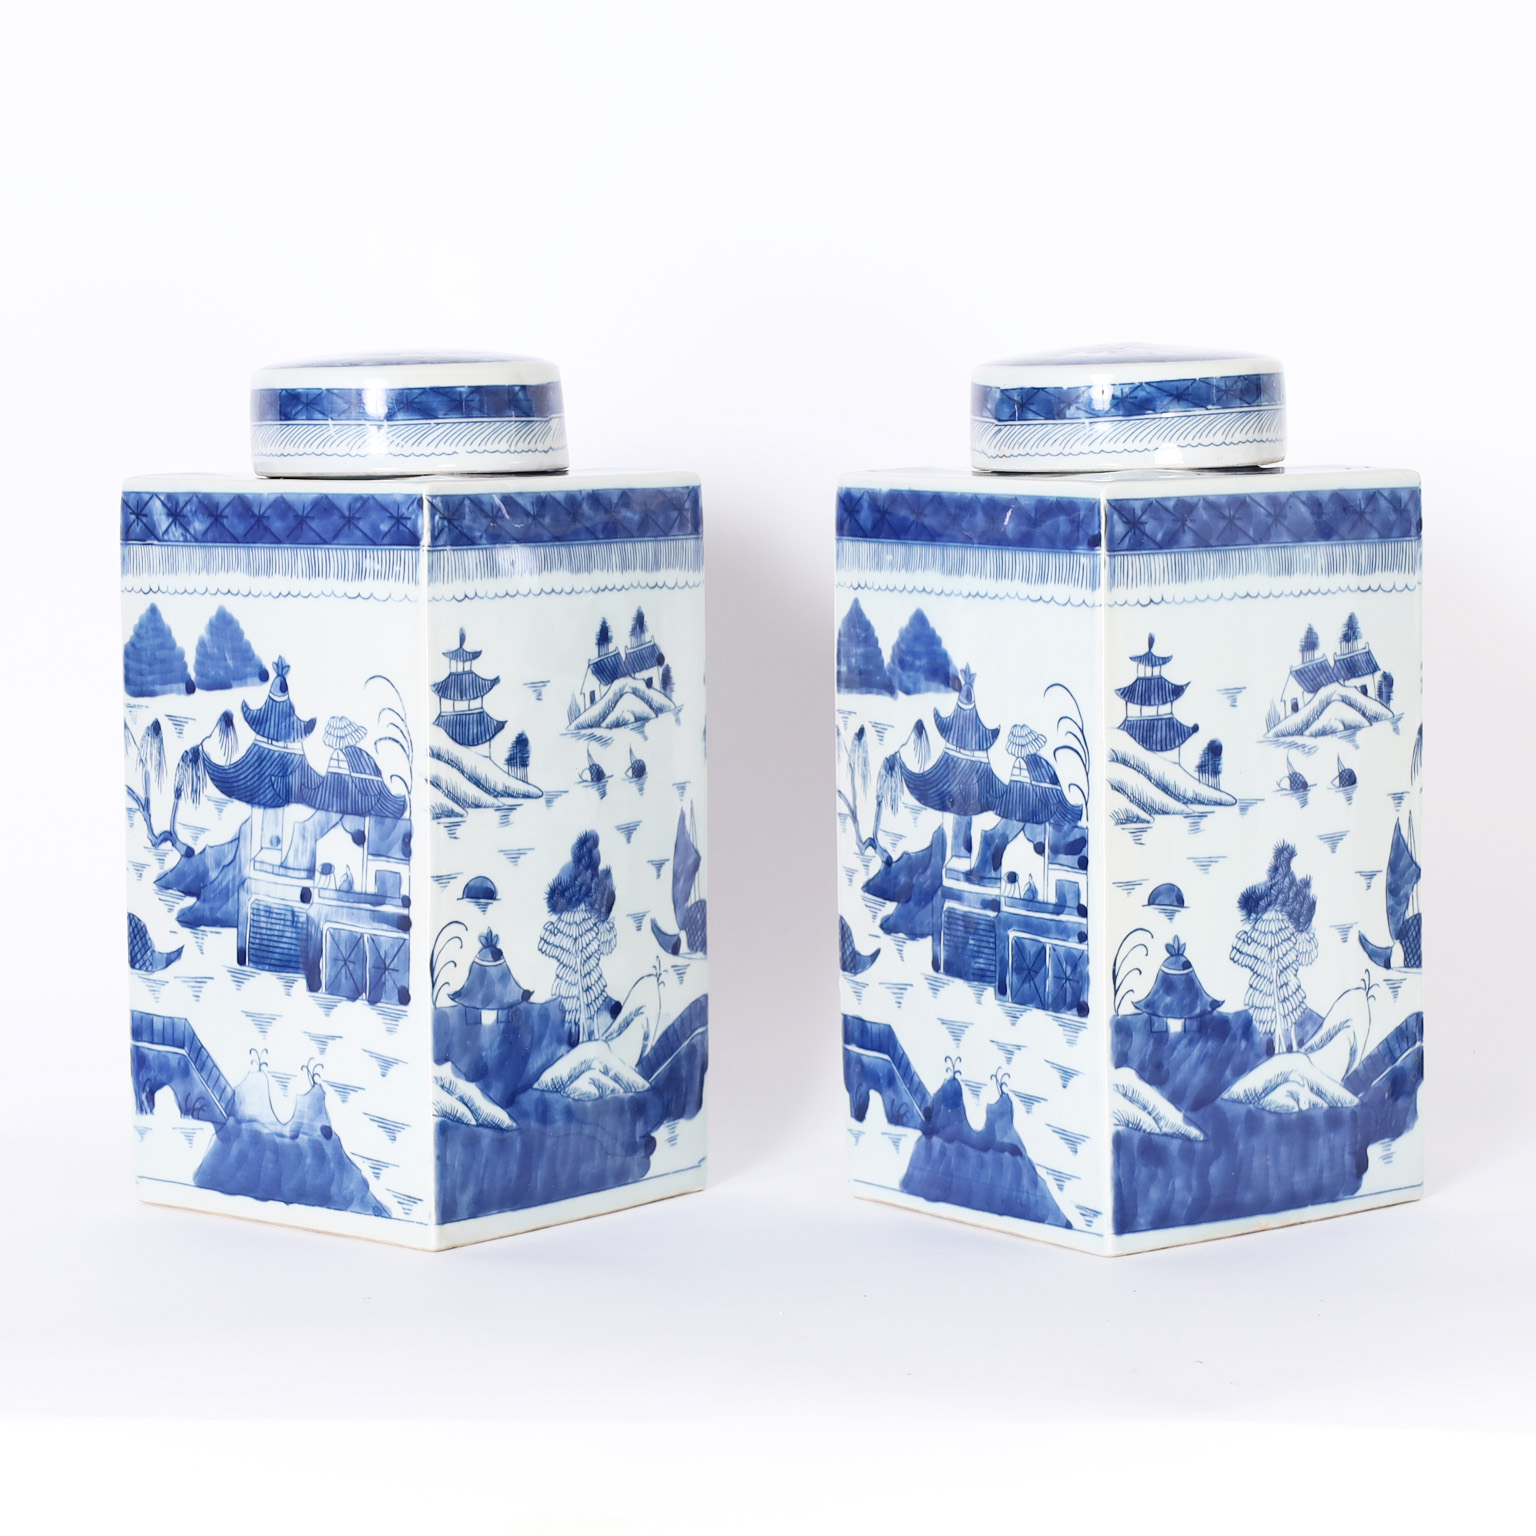 Pair of Chinese Blue and White Porcelain Jars or Tea Caddies